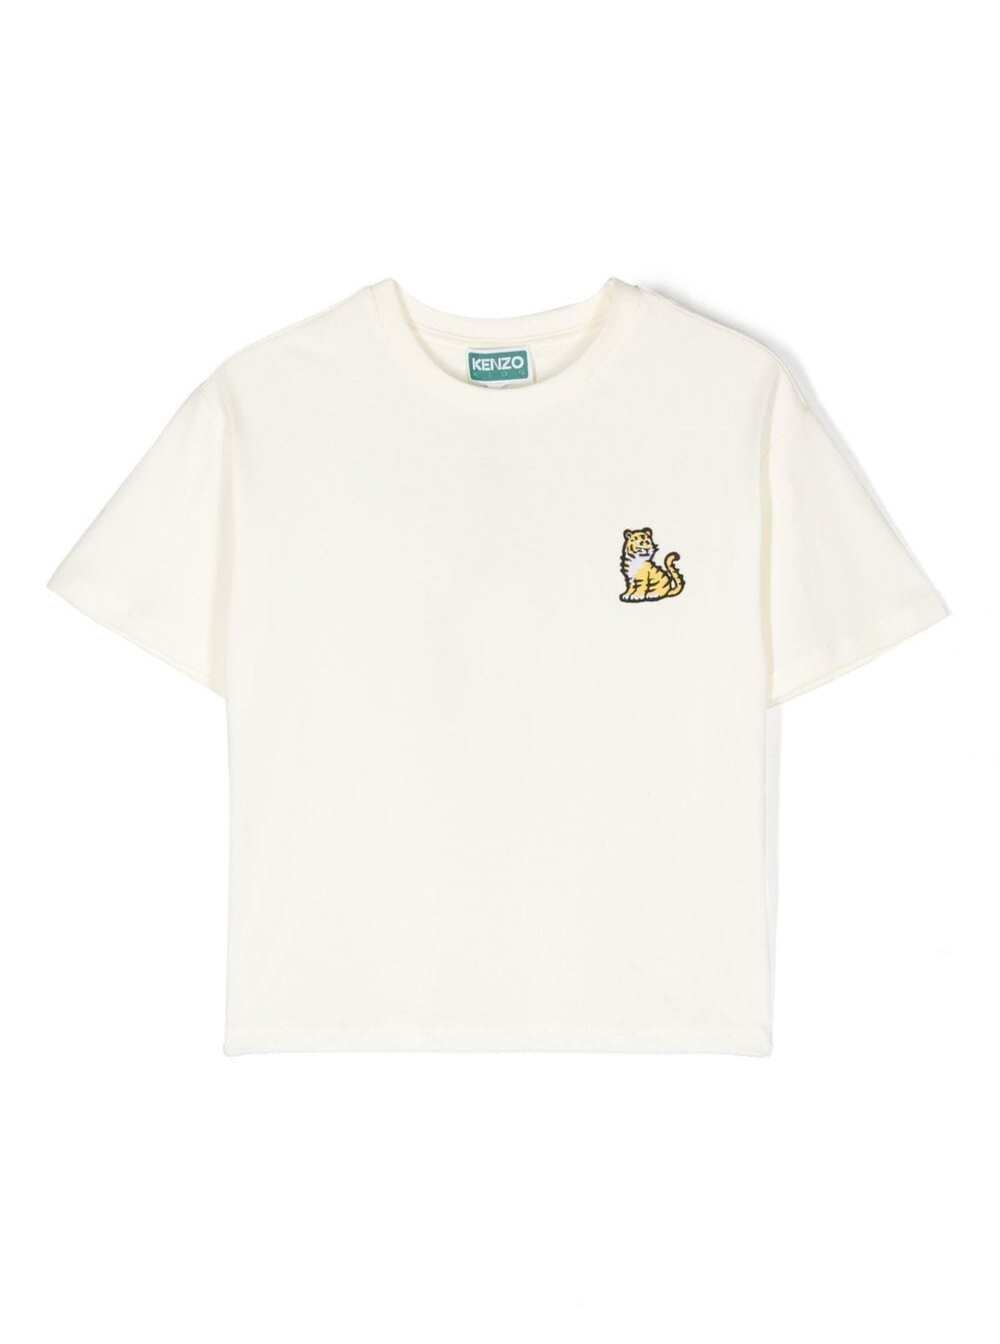 KENZO WHITE T-SHIRT WITH TIGER AND LOGO PRINT IN COTTON GIRL